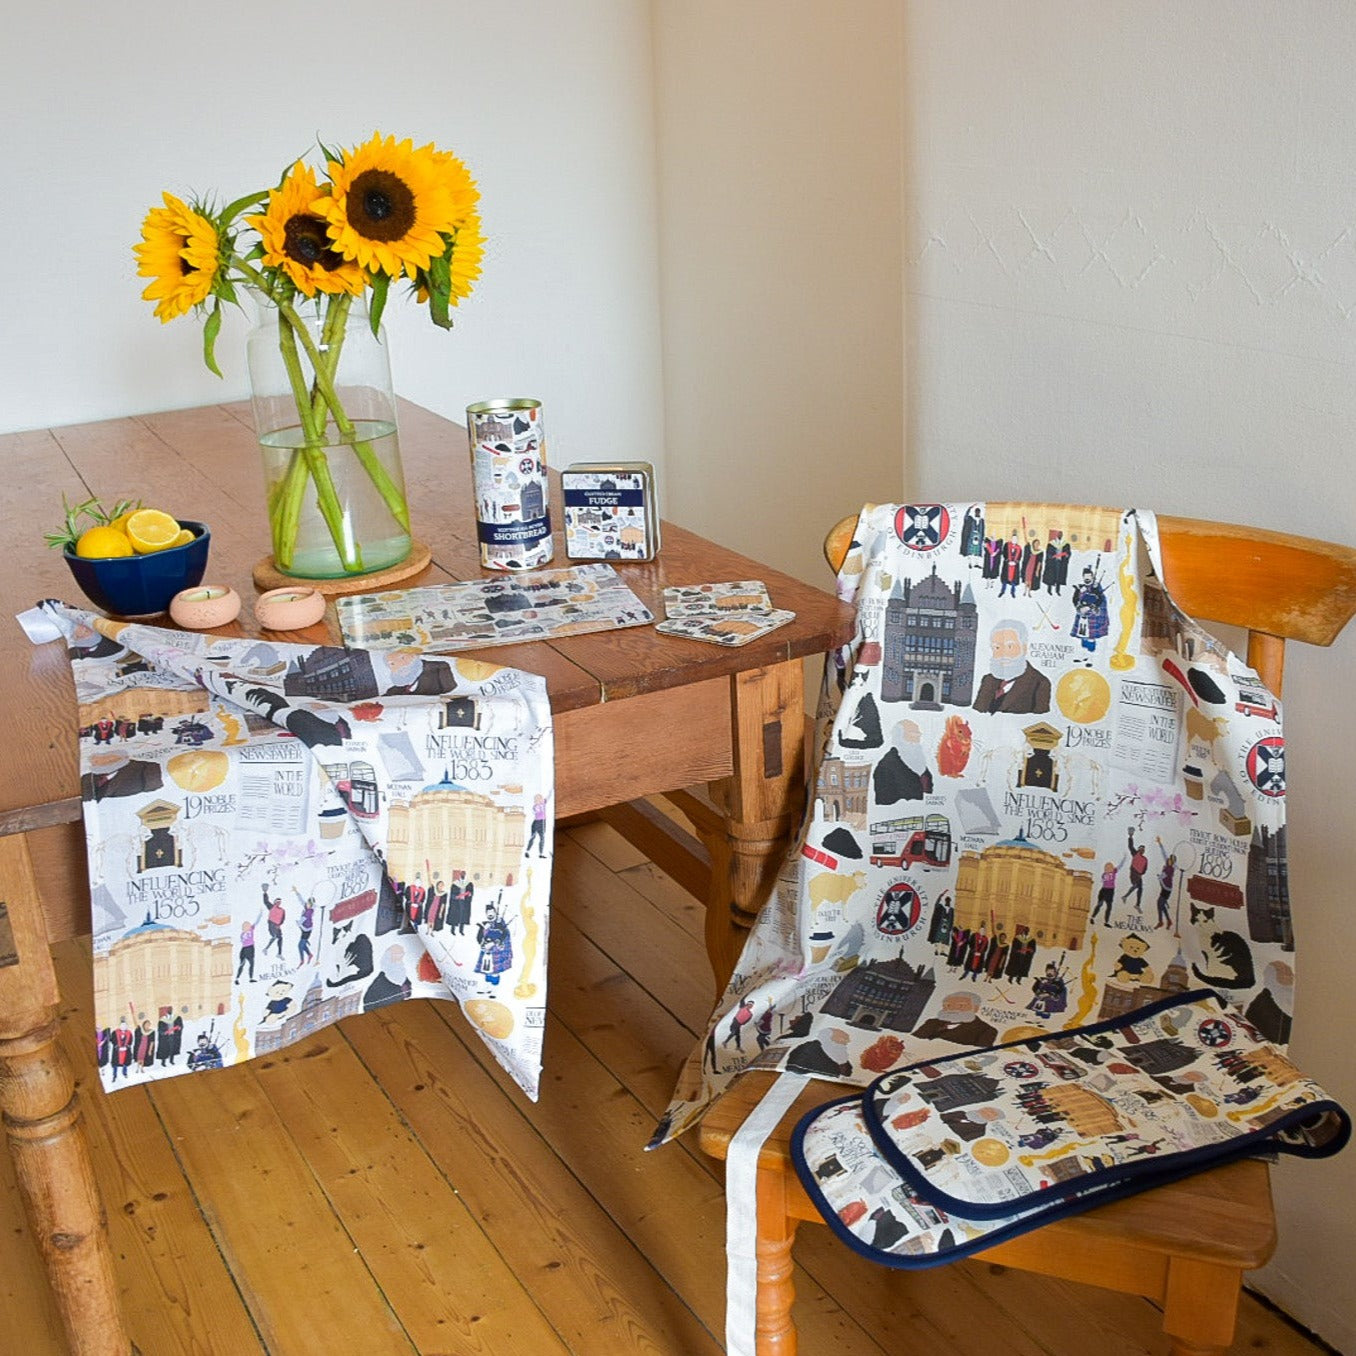 Visual presenation of Heritage Collection items, including: Clotted Cream Fudge, Scottish All Butter Shortbread, Placemat, Coaster, Apron, Oven Gloves and Tea Towel.